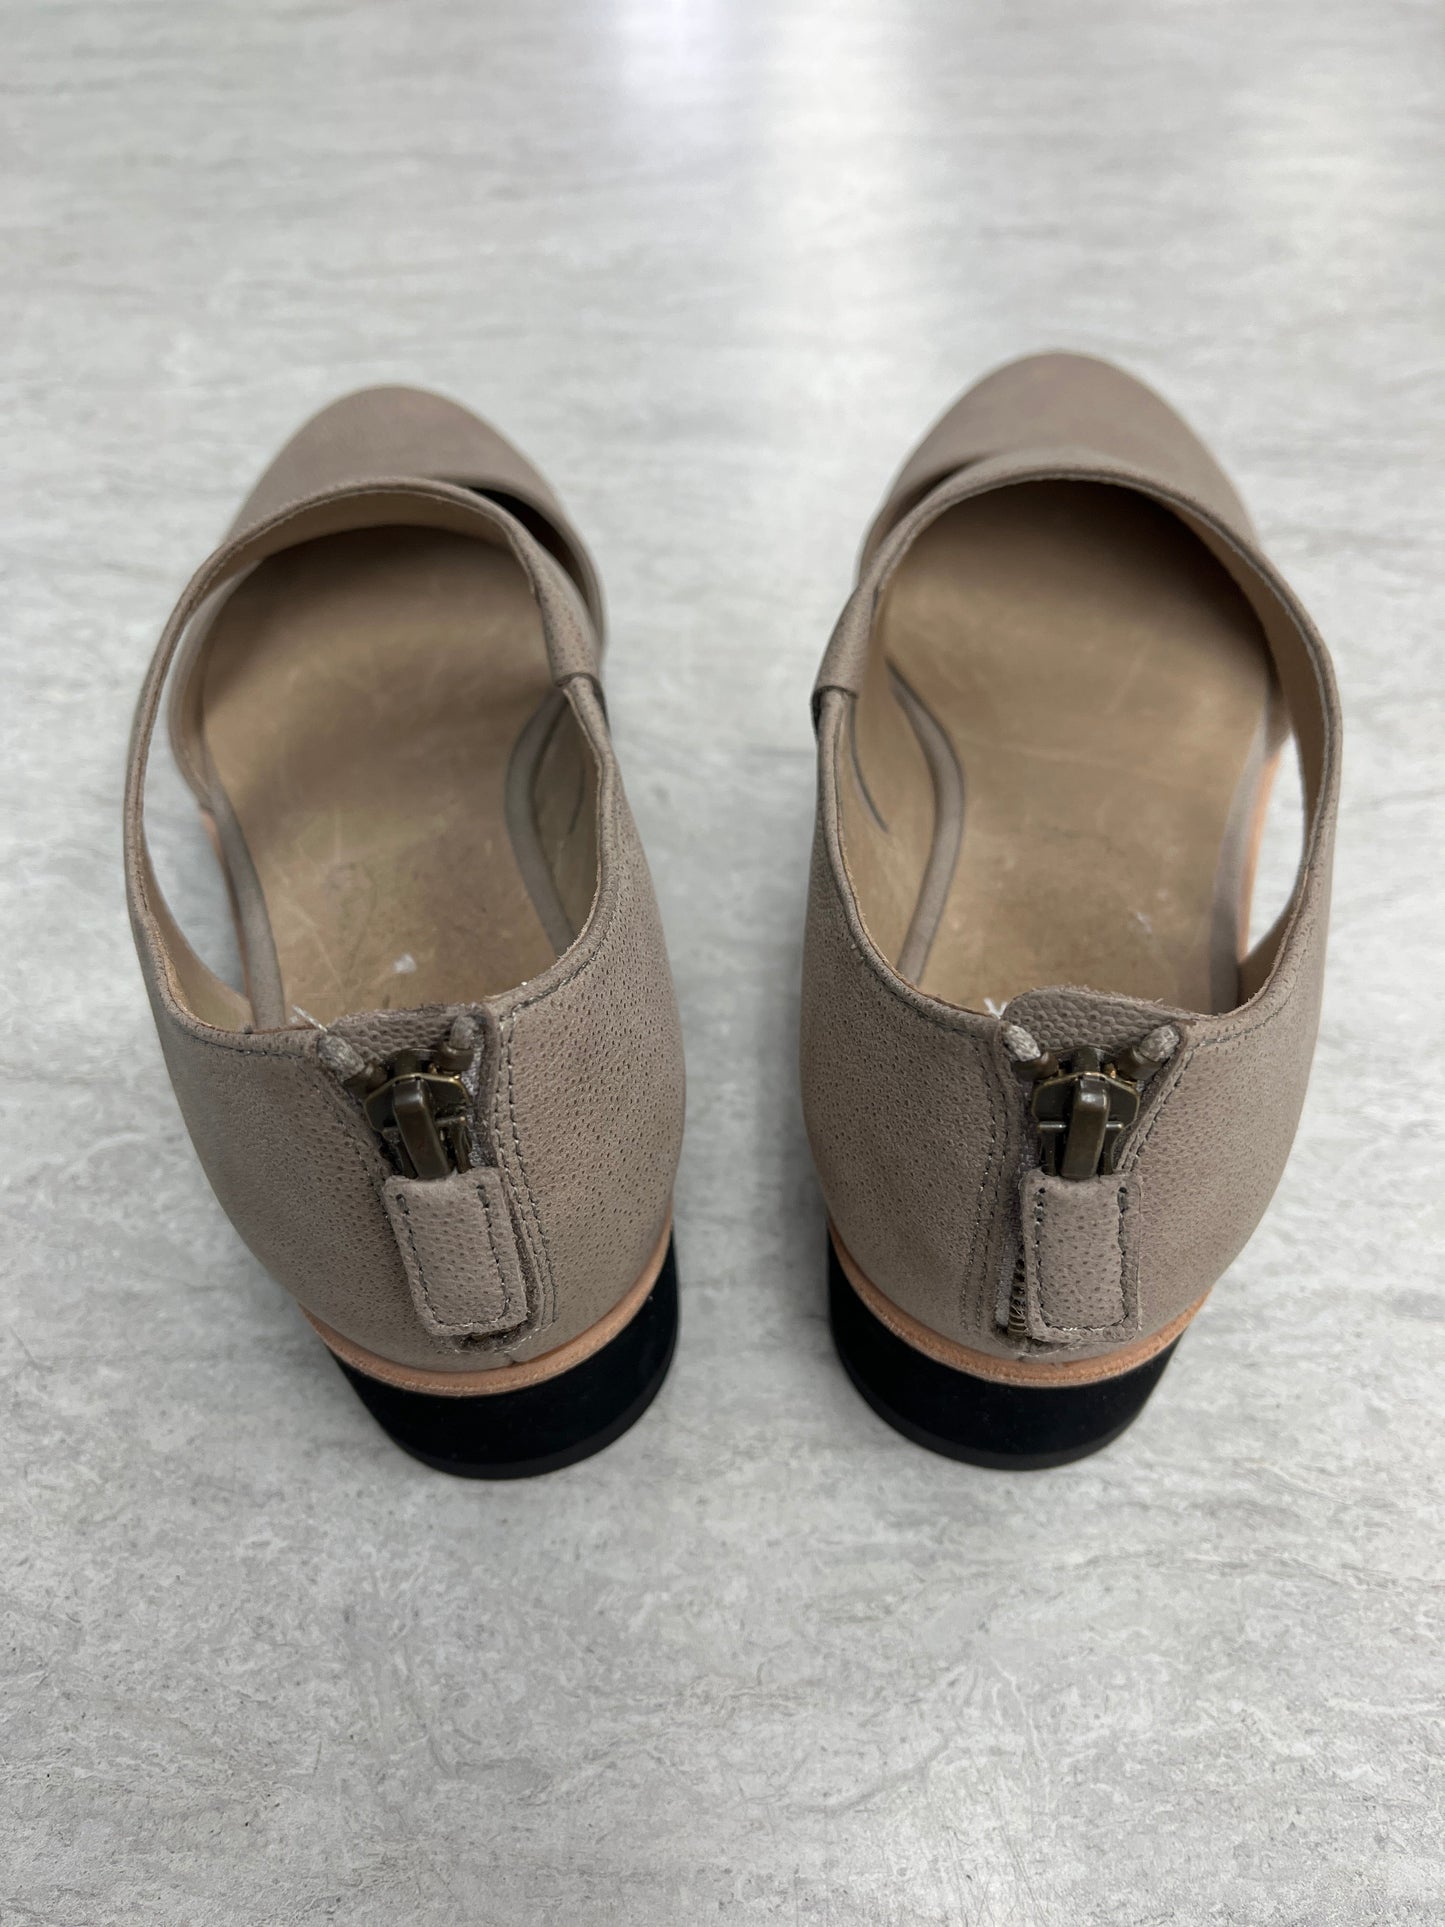 Tan Shoes Heels Wedge Eileen Fisher, Size 7.5